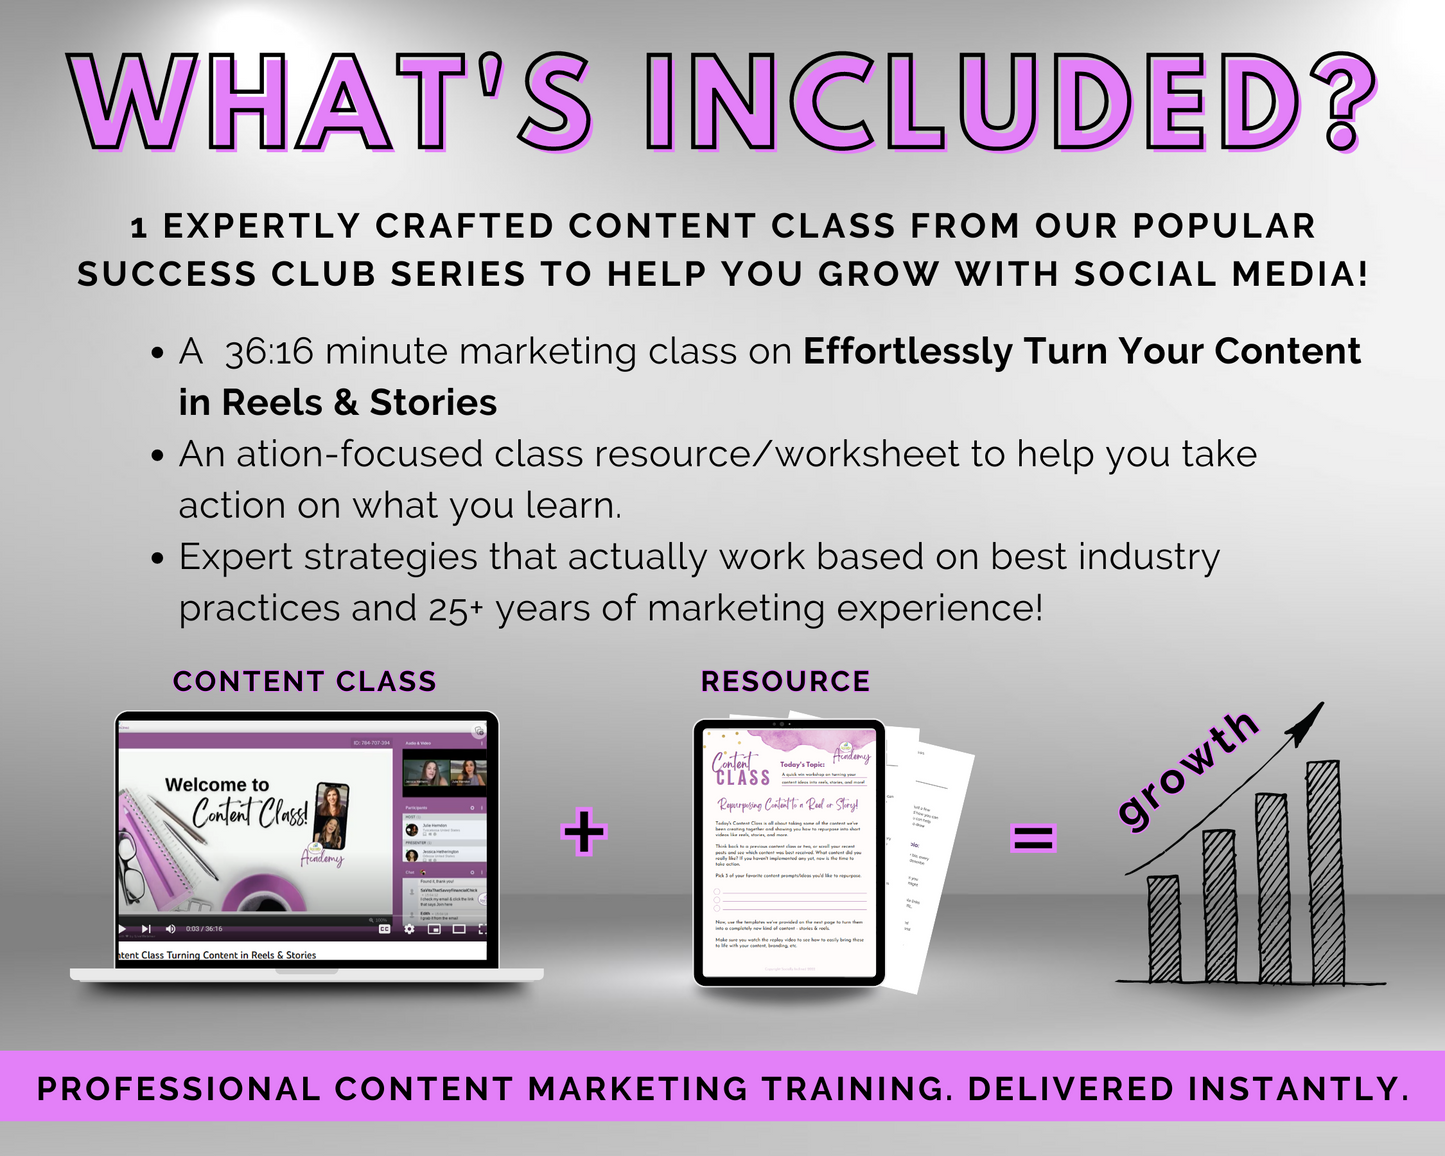 Content Class - Effortlessly Turn Your Content in Reels & Stories Masterclass